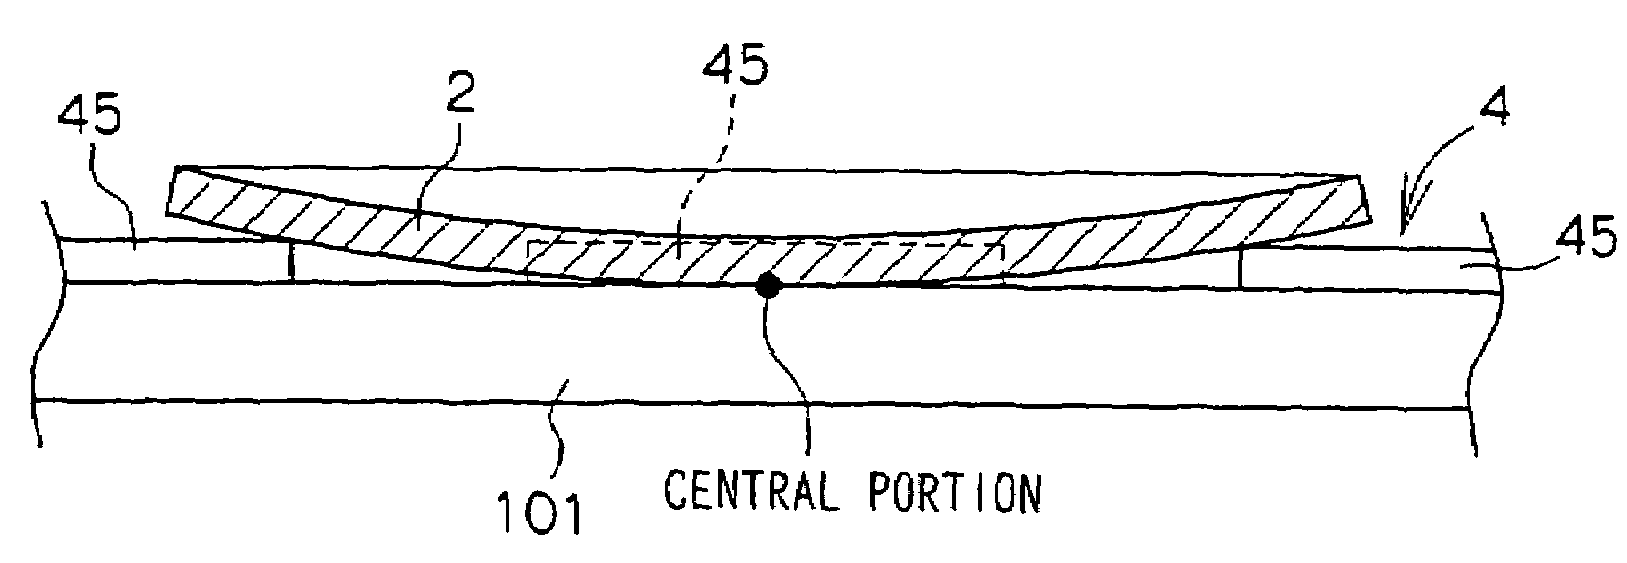 Solid-state image pickup device and optical instrument using the same for adjusting curvatures of solid-state image pickup device based on focal length of lenses in optical instrument